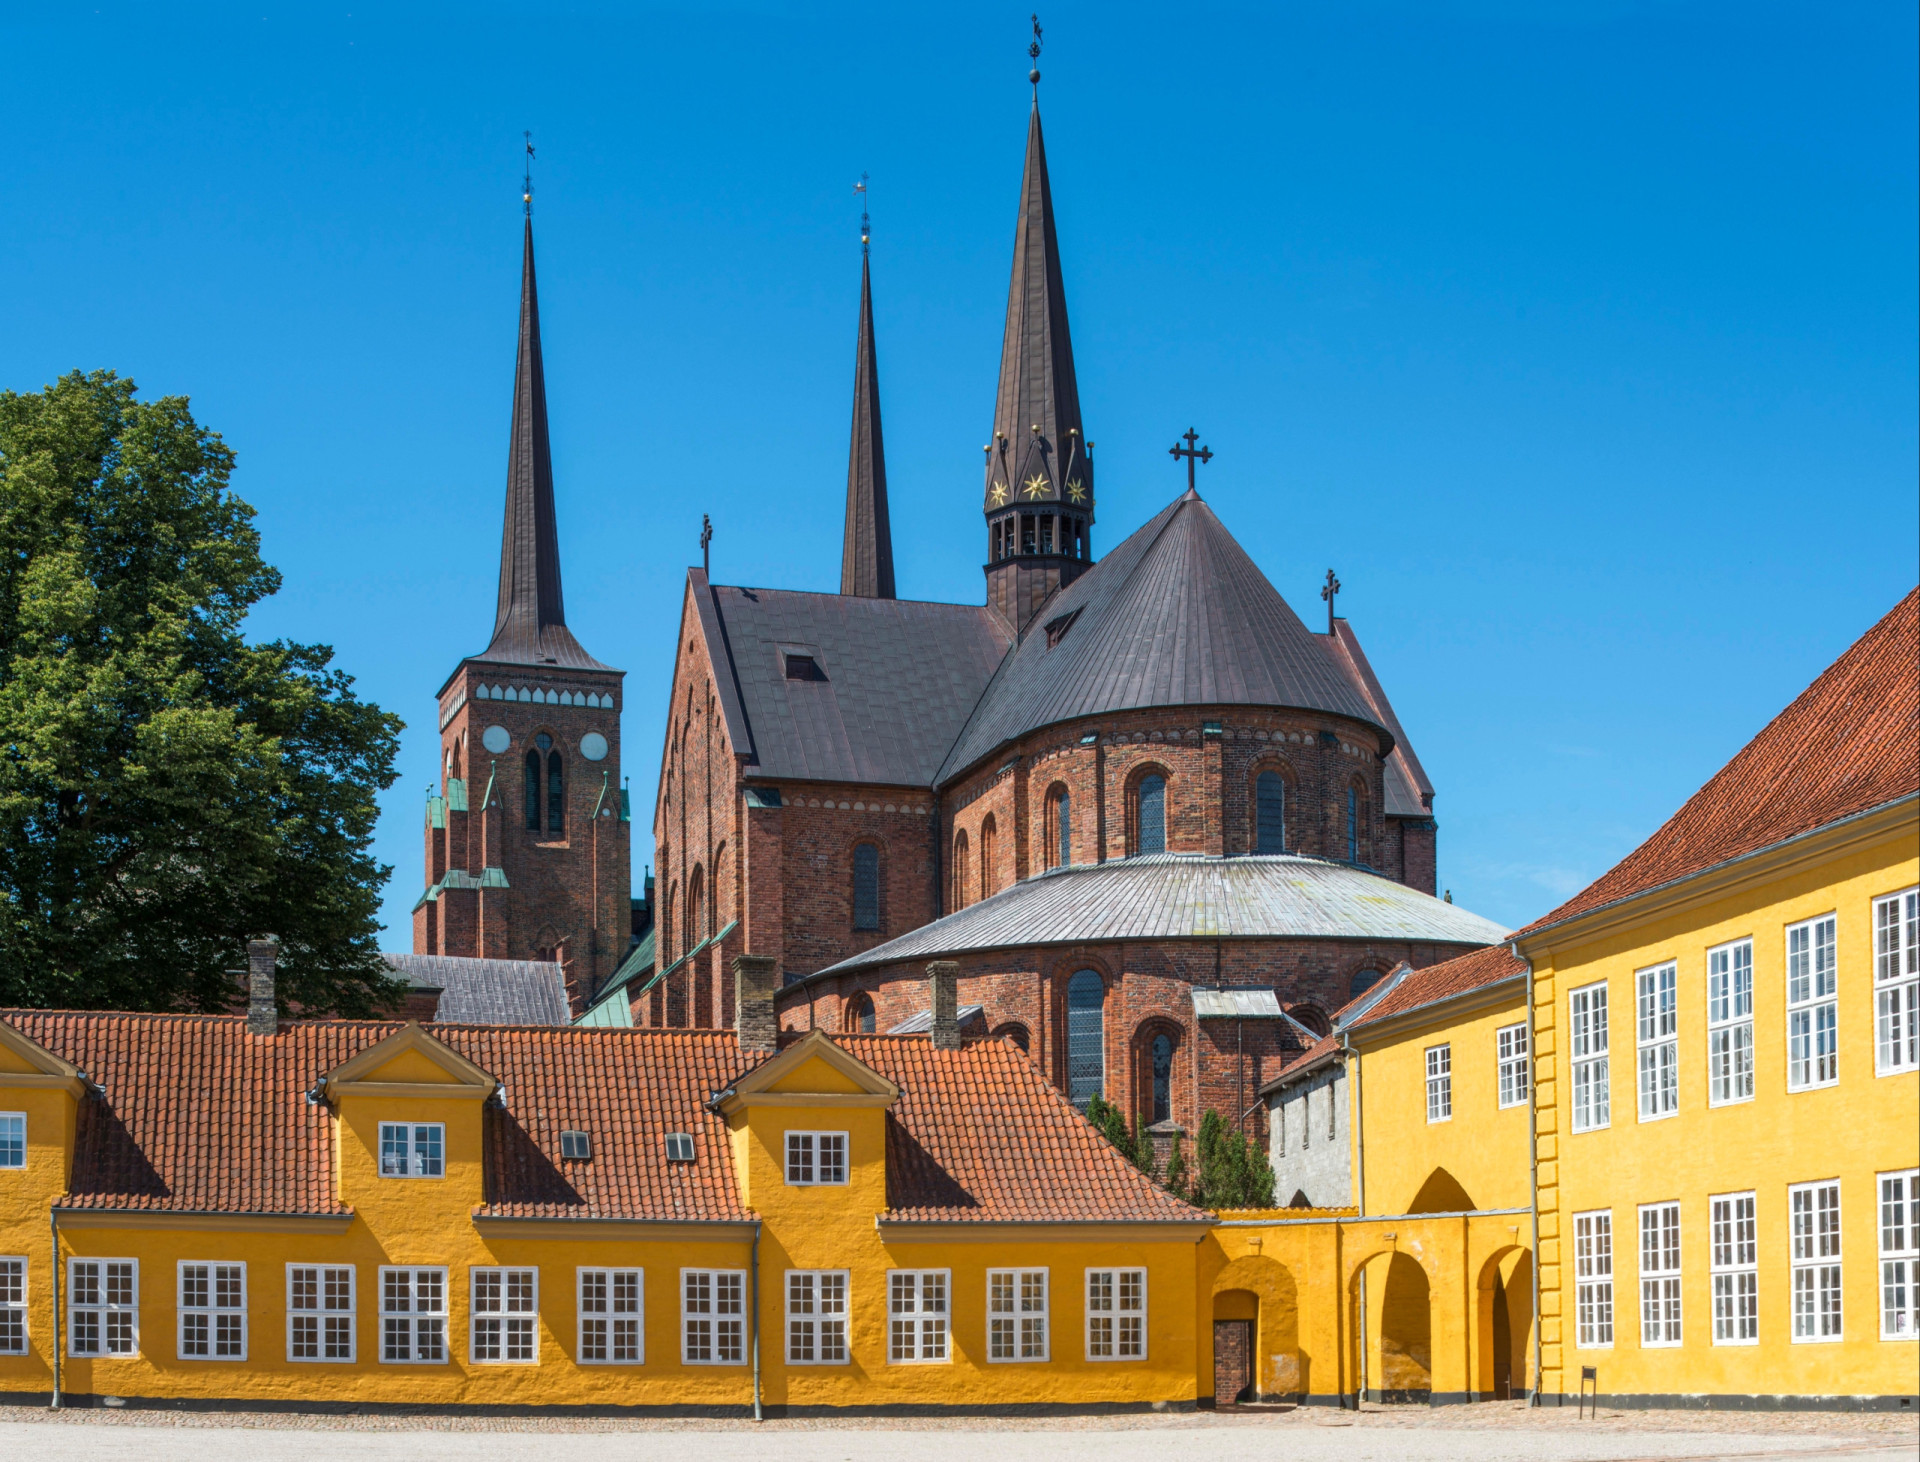 <p>Roskilde Cathedral is the most important church in Denmark, the official royal burial church of the Danish monarchs, and a UNESCO World Heritage Site. One of the earliest examples in Scandinavia of a Gothic cathedral built in brick, the cathedral stands tall and impressive on the island of Zealand.</p><p><a href="https://www.msn.com/en-us/community/channel/vid-7xx8mnucu55yw63we9va2gwr7uihbxwc68fxqp25x6tg4ftibpra?cvid=94631541bc0f4f89bfd59158d696ad7e">Follow us and access great exclusive content every day</a></p>